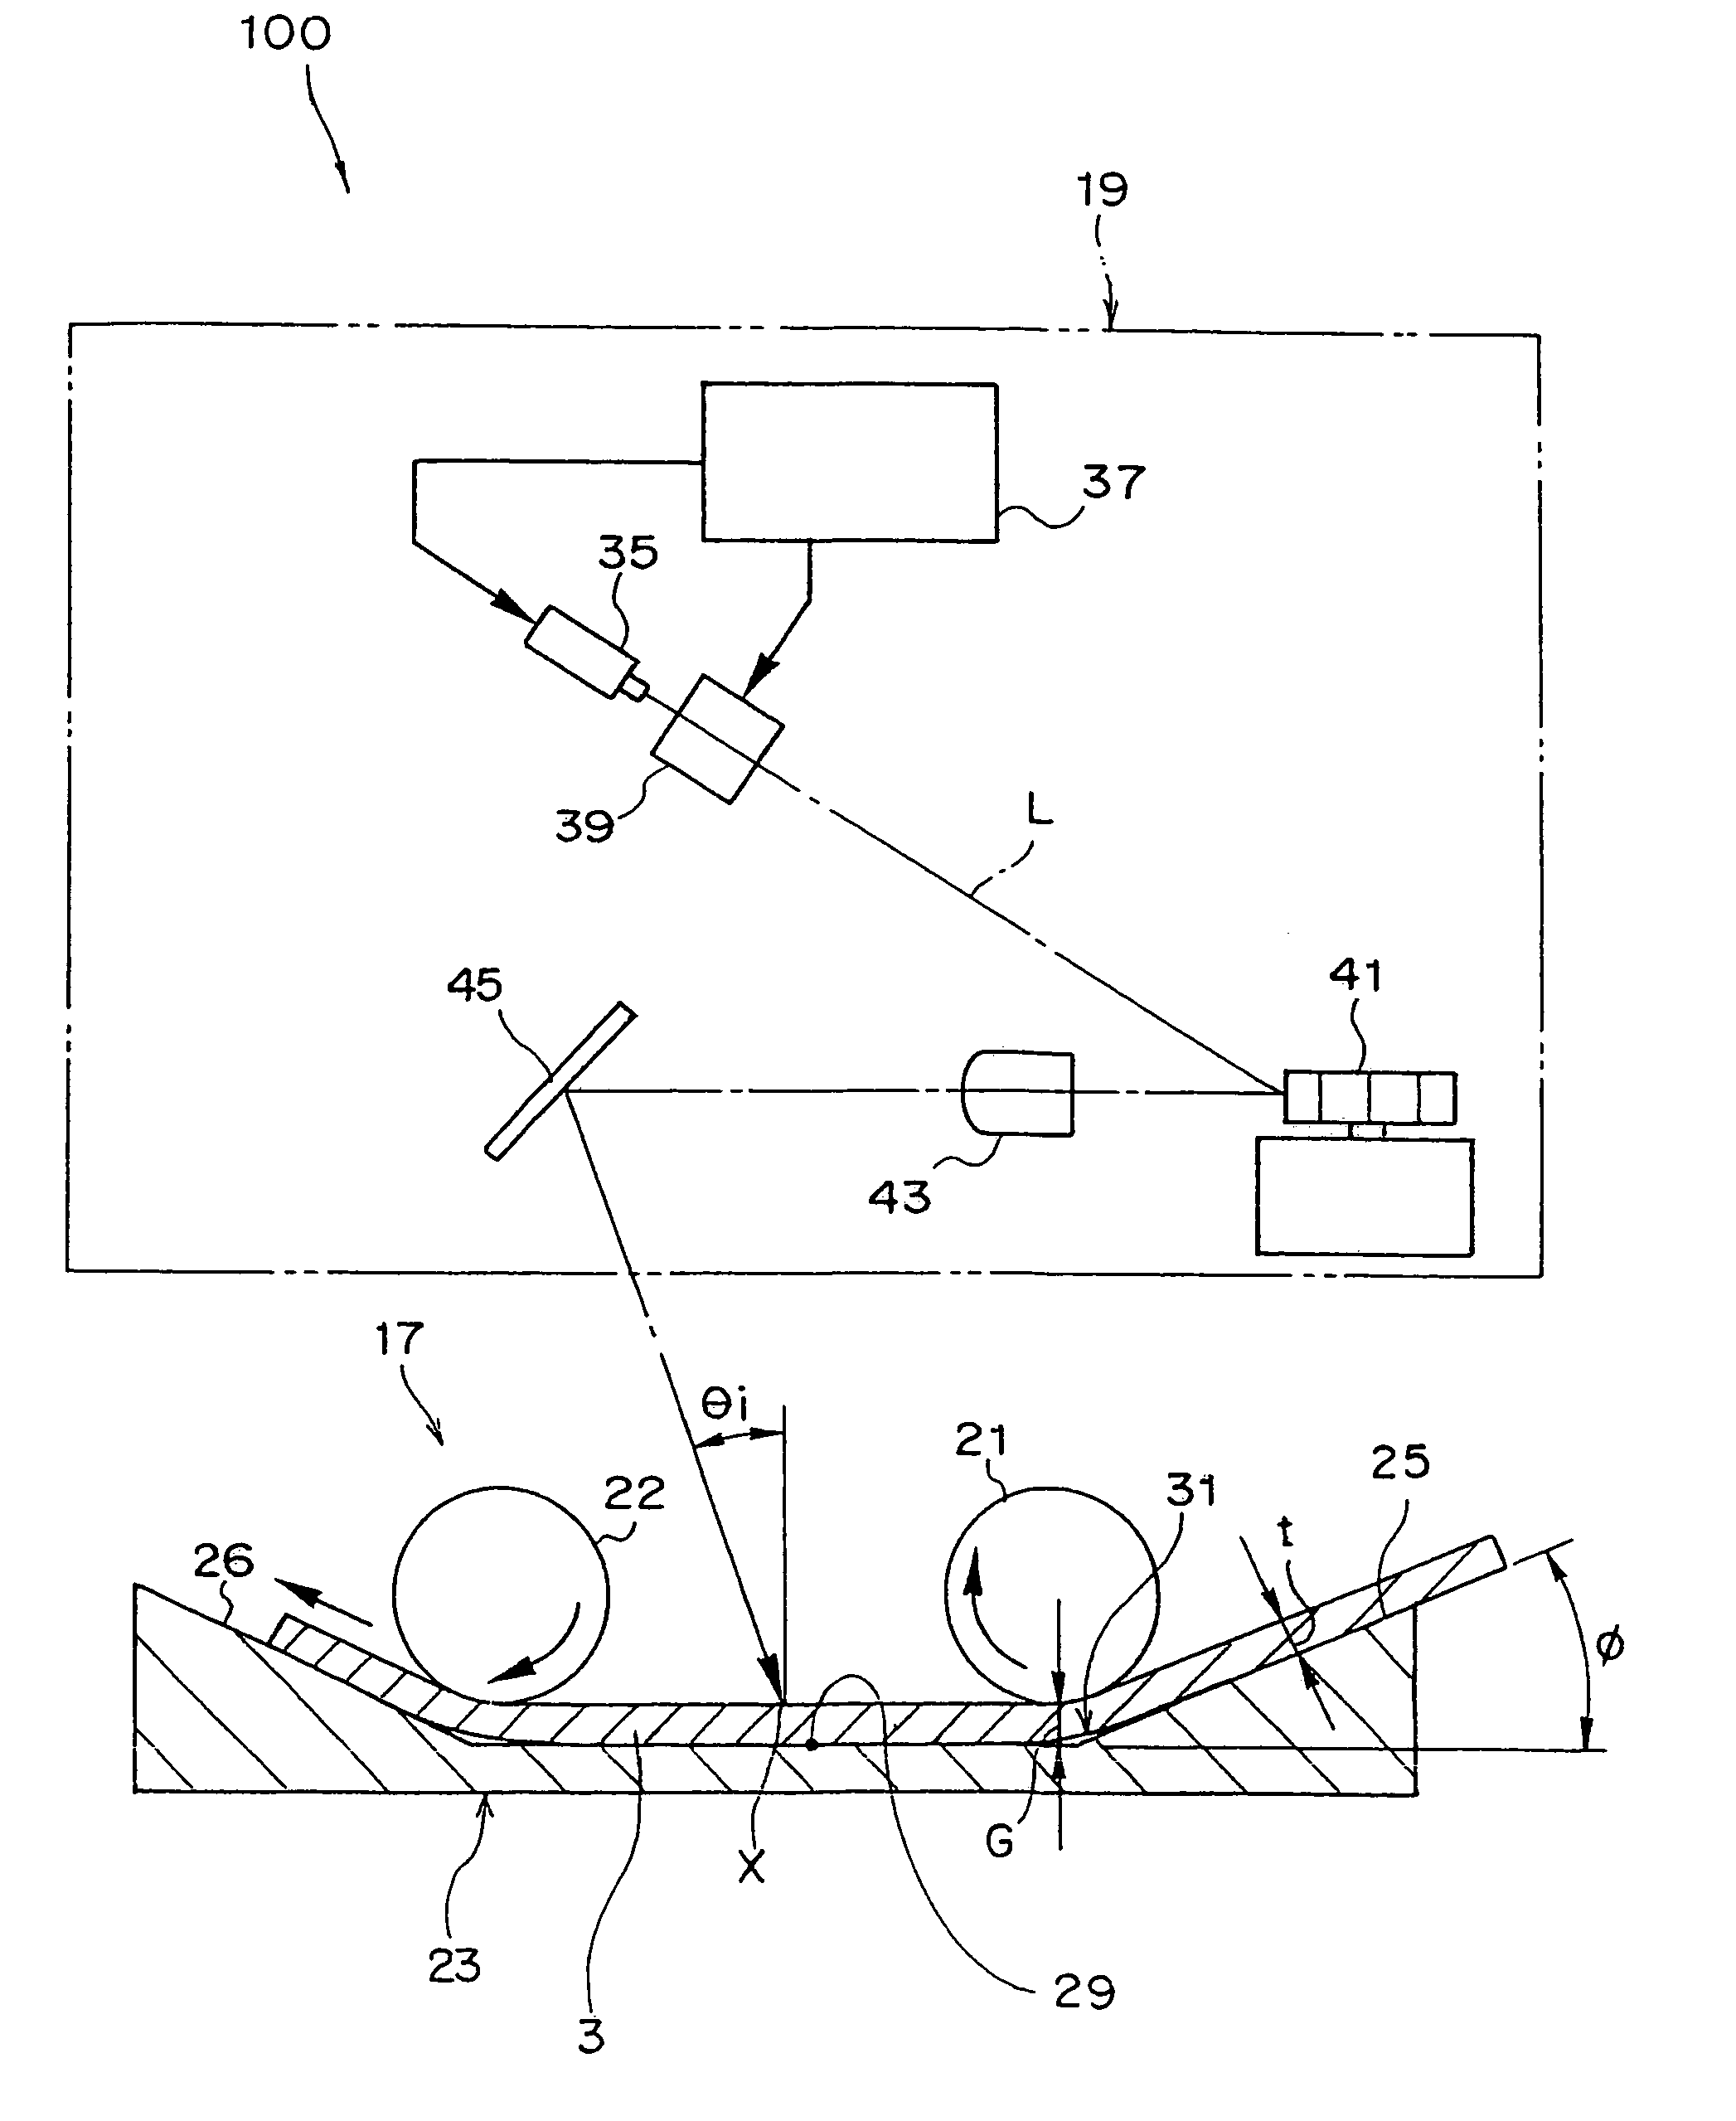 Image forming method using photothermographic material